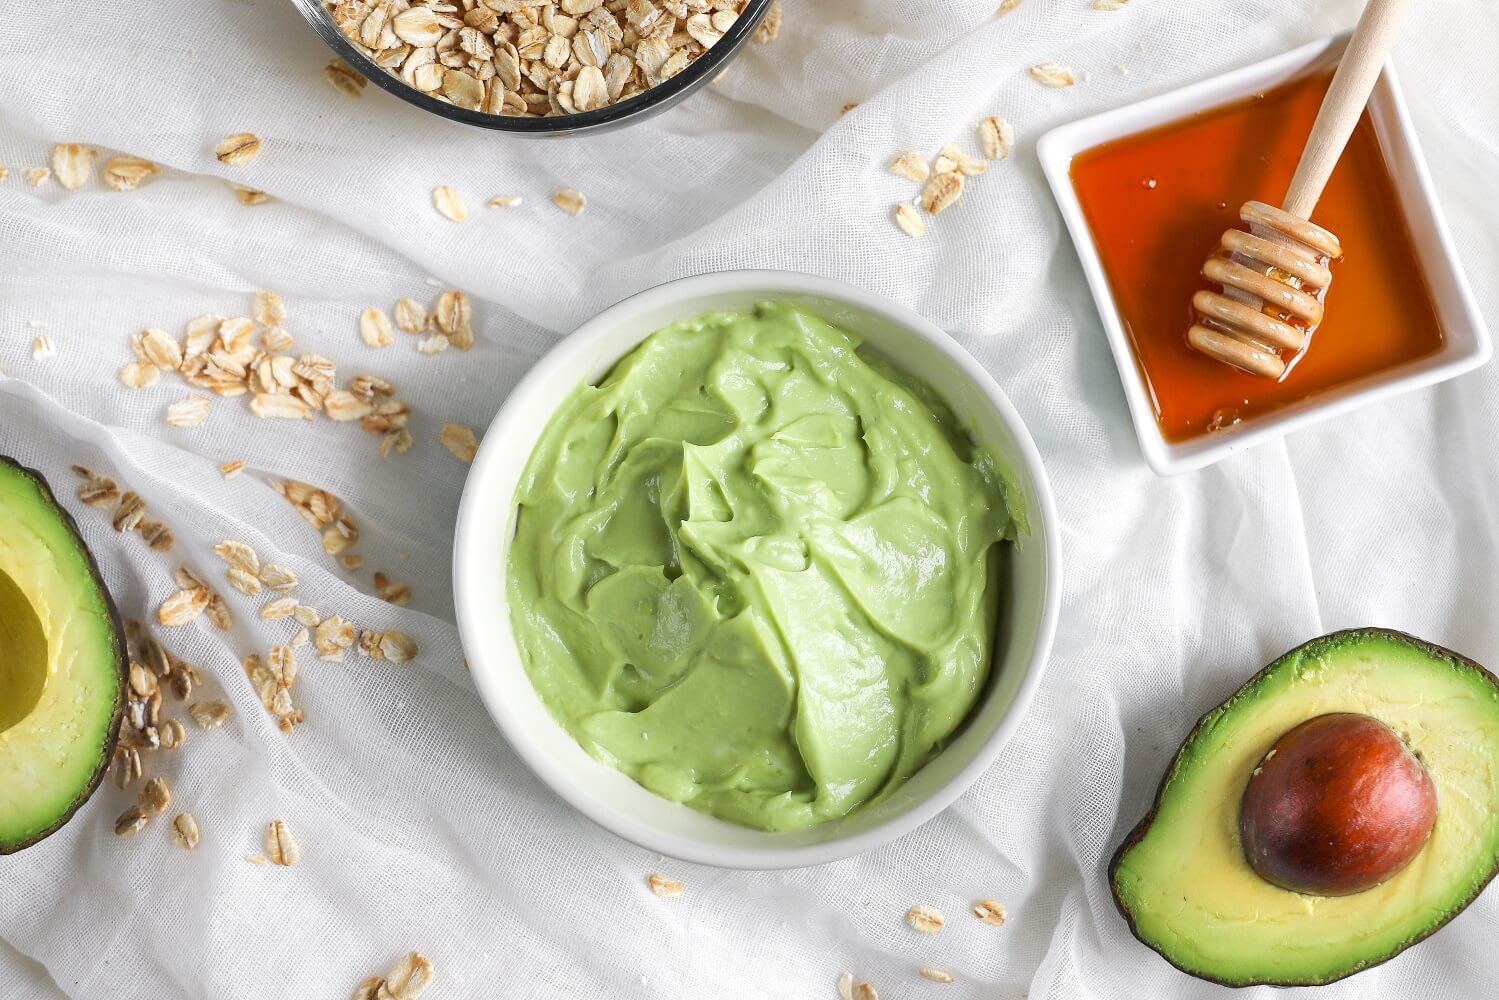 Sui Sparsommelig pence Avocado Face Mask - Simple and Rejuvenating! - The Produce Moms